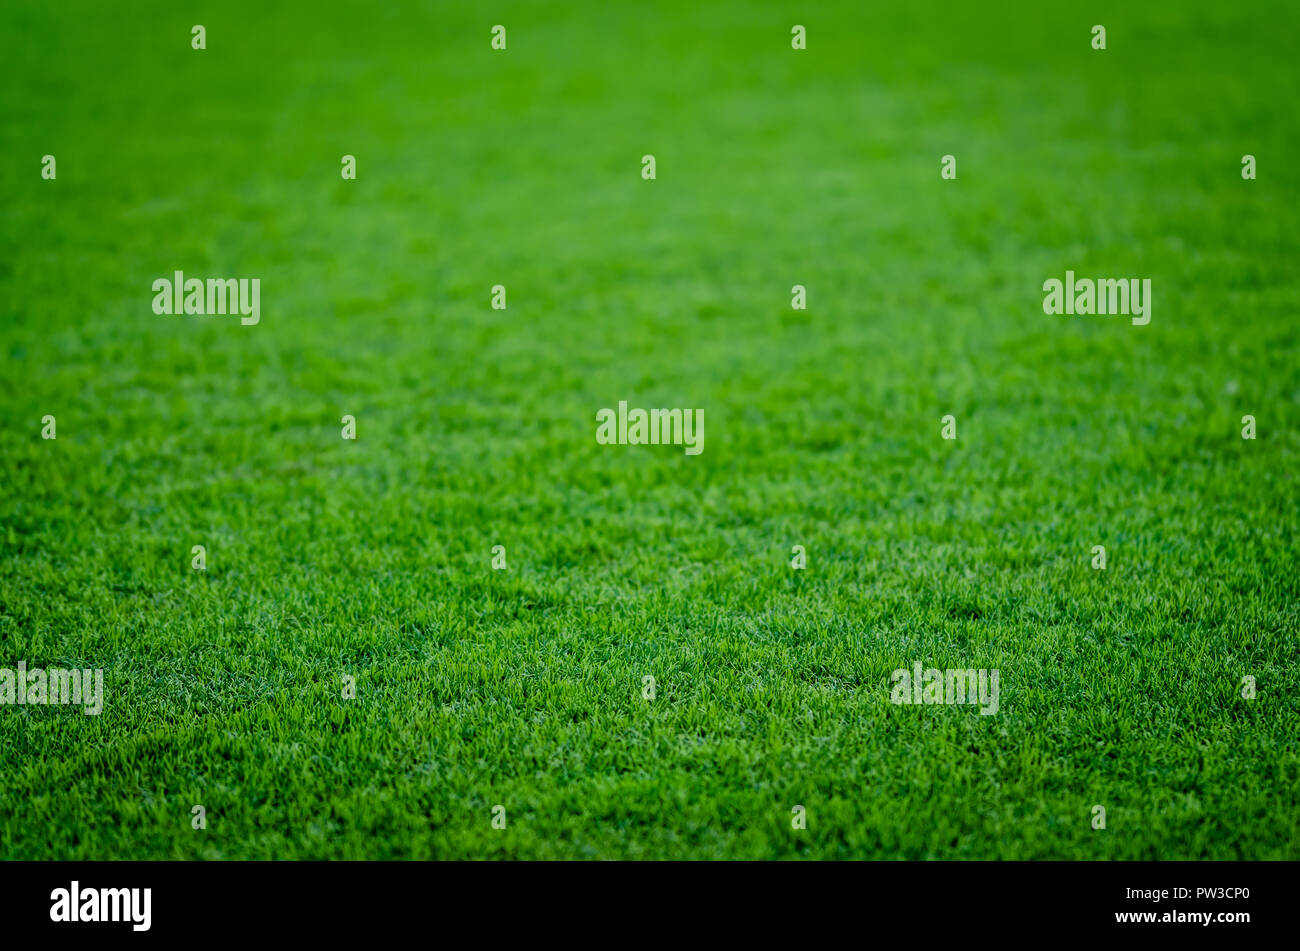 Abstract background of green grass on a Football Field. Ideal for placing objects with depth of field. Stock Photo